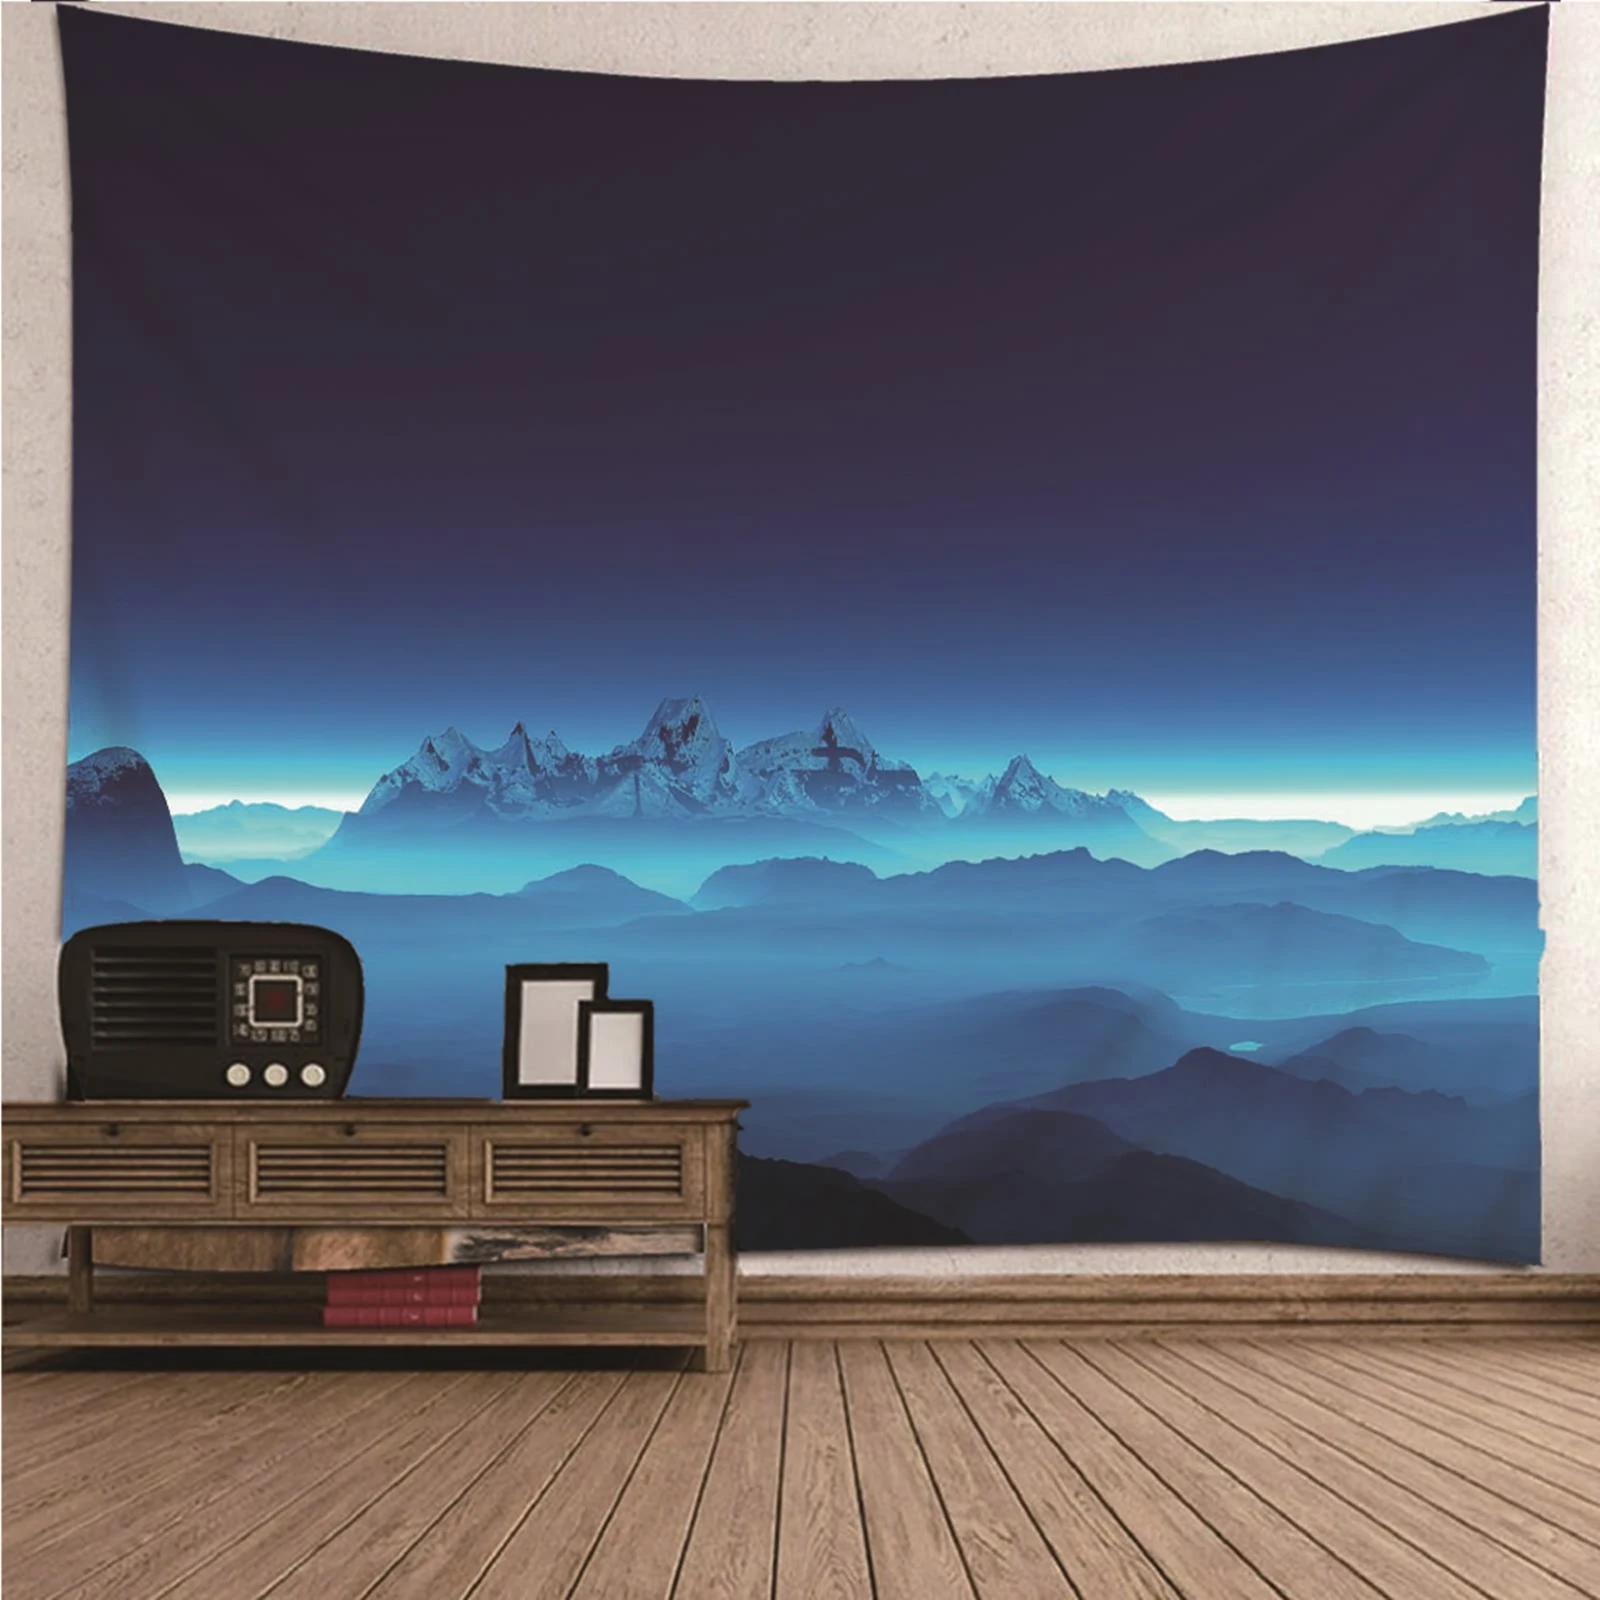 

Dorm Tapestry Hanging Wall Decor natural scenery Mountain Scenery Wall Hanging Blanket Dorm Art Decor Covering